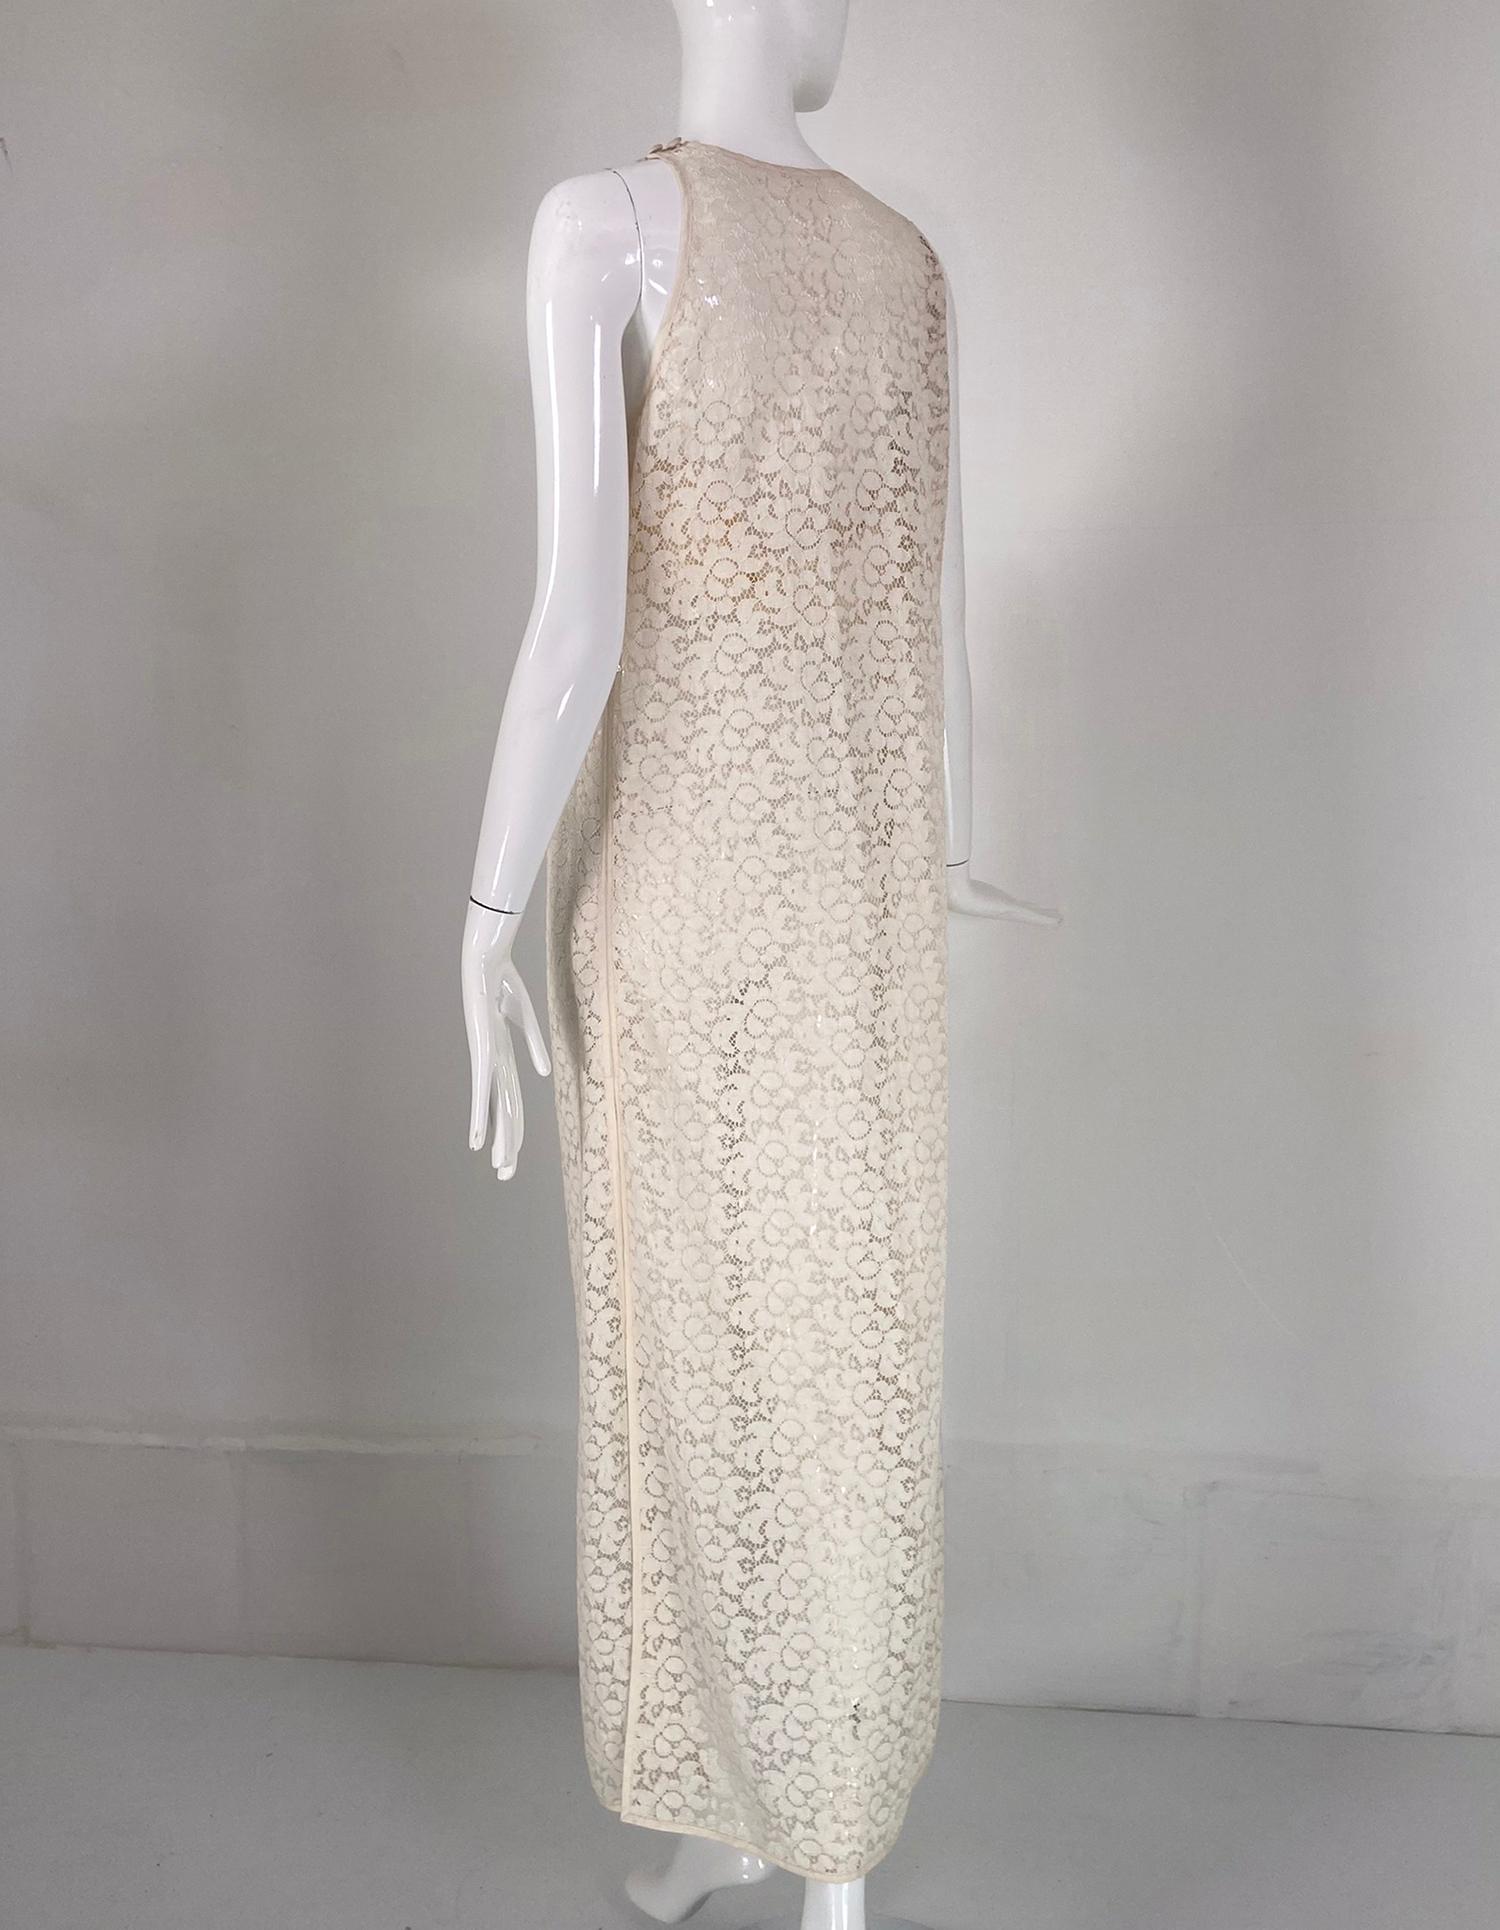 Jiki Monte Carlo Creations Off White Lace Maxi Shift Dress In Good Condition For Sale In West Palm Beach, FL